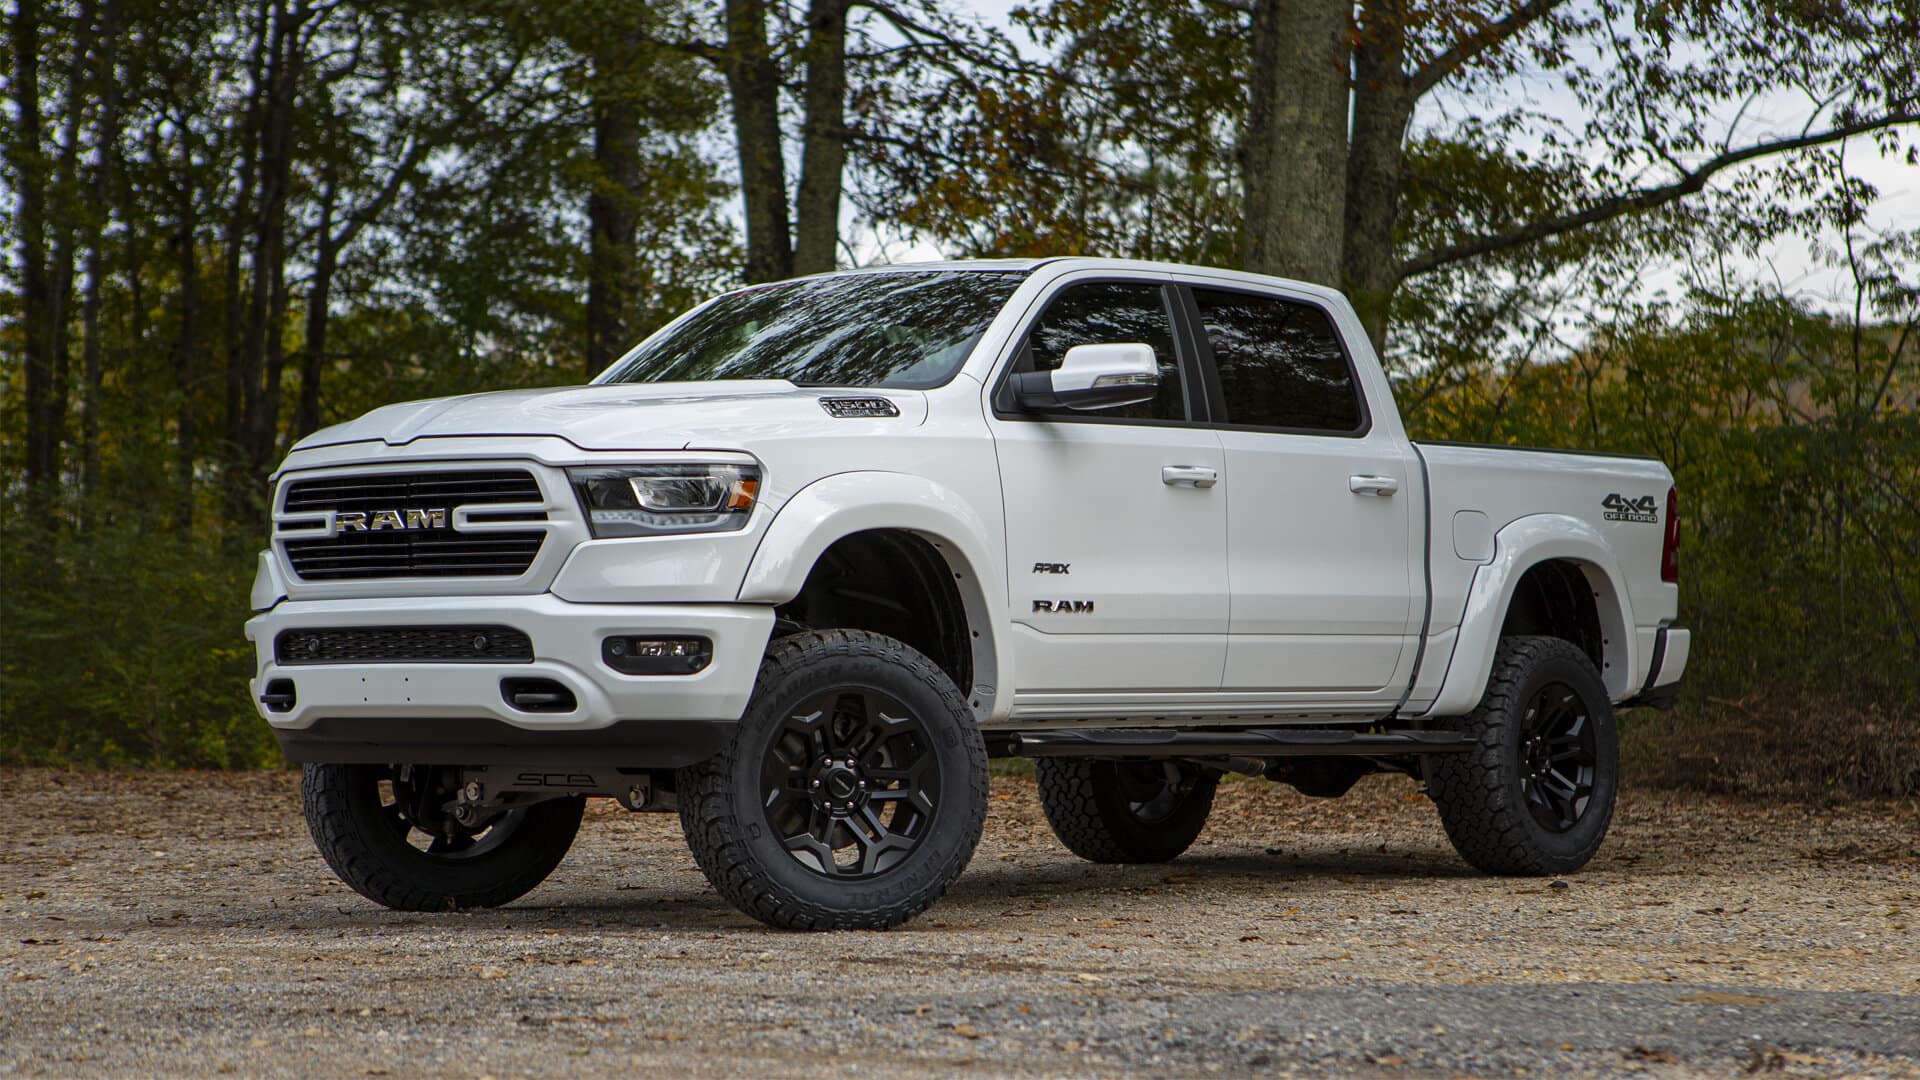 SCA RAM 1500 Apex Side Angle in White.